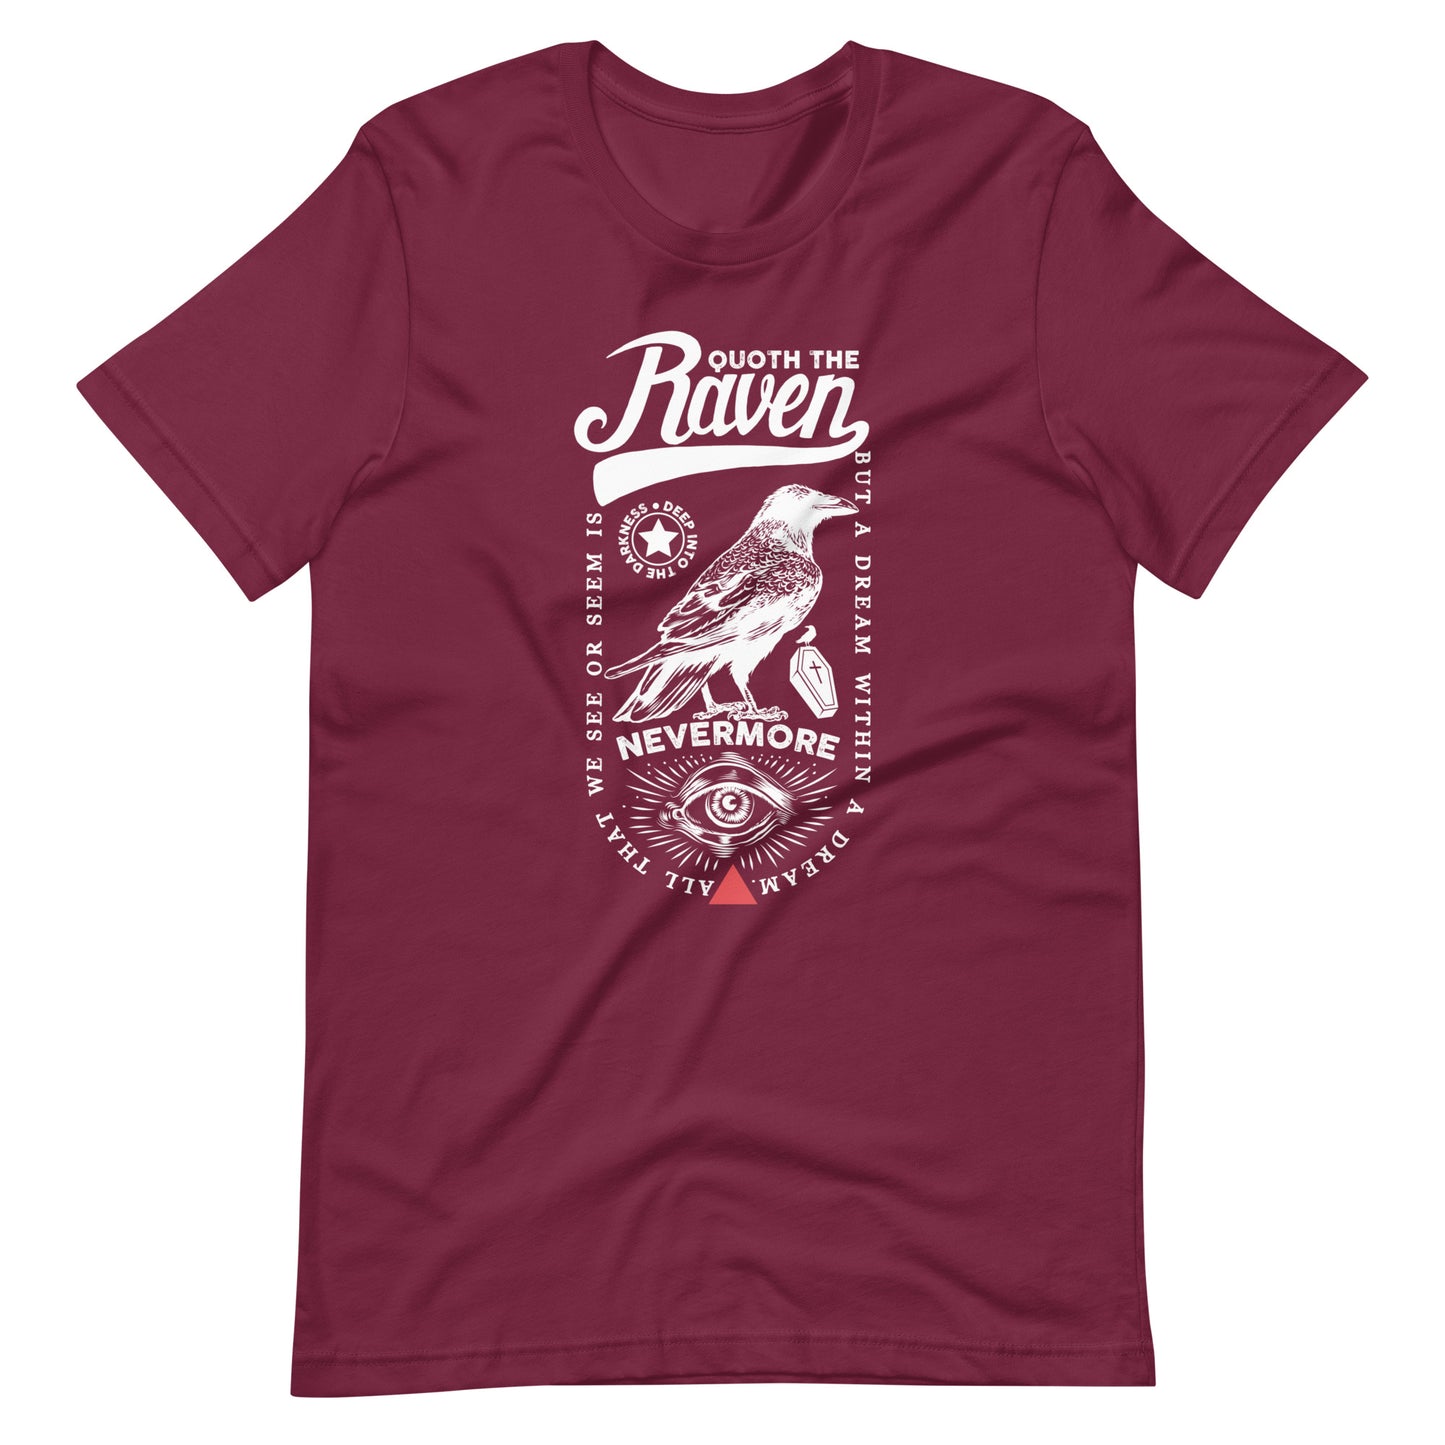 Quoth the Raven Nevermore Loaded - Men's t-shirt - Maroon Front 